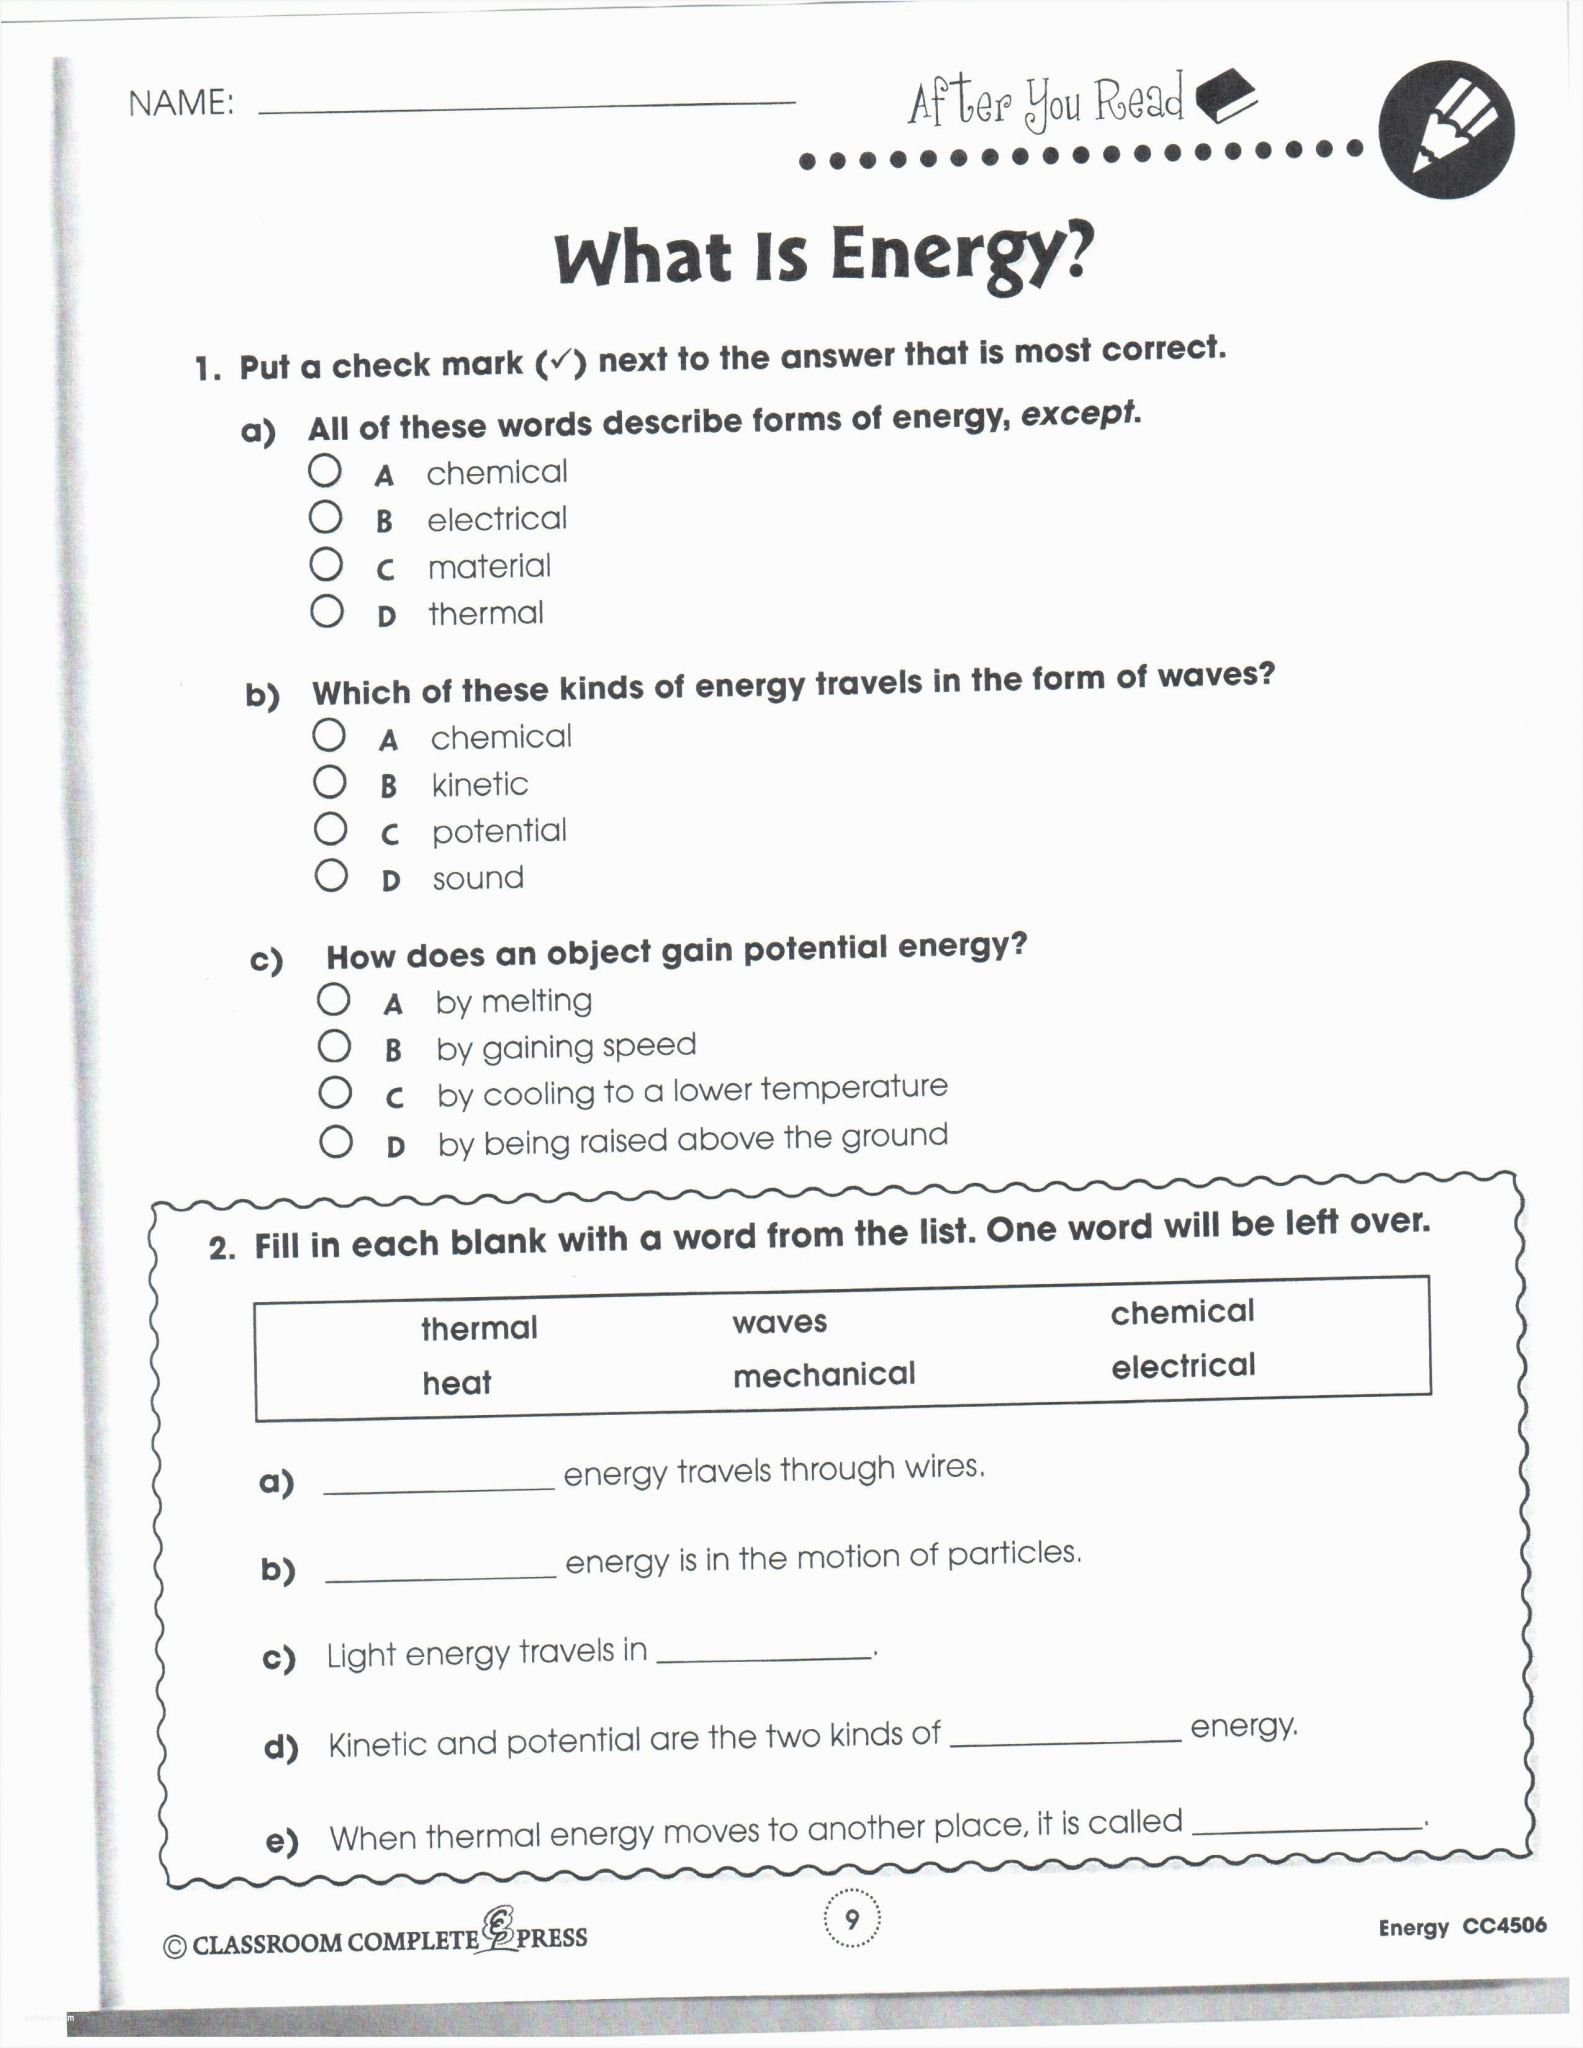 Apollo 13 Movie Worksheet Answers  Briefencounters And Apollo 13 Movie Worksheet Answers